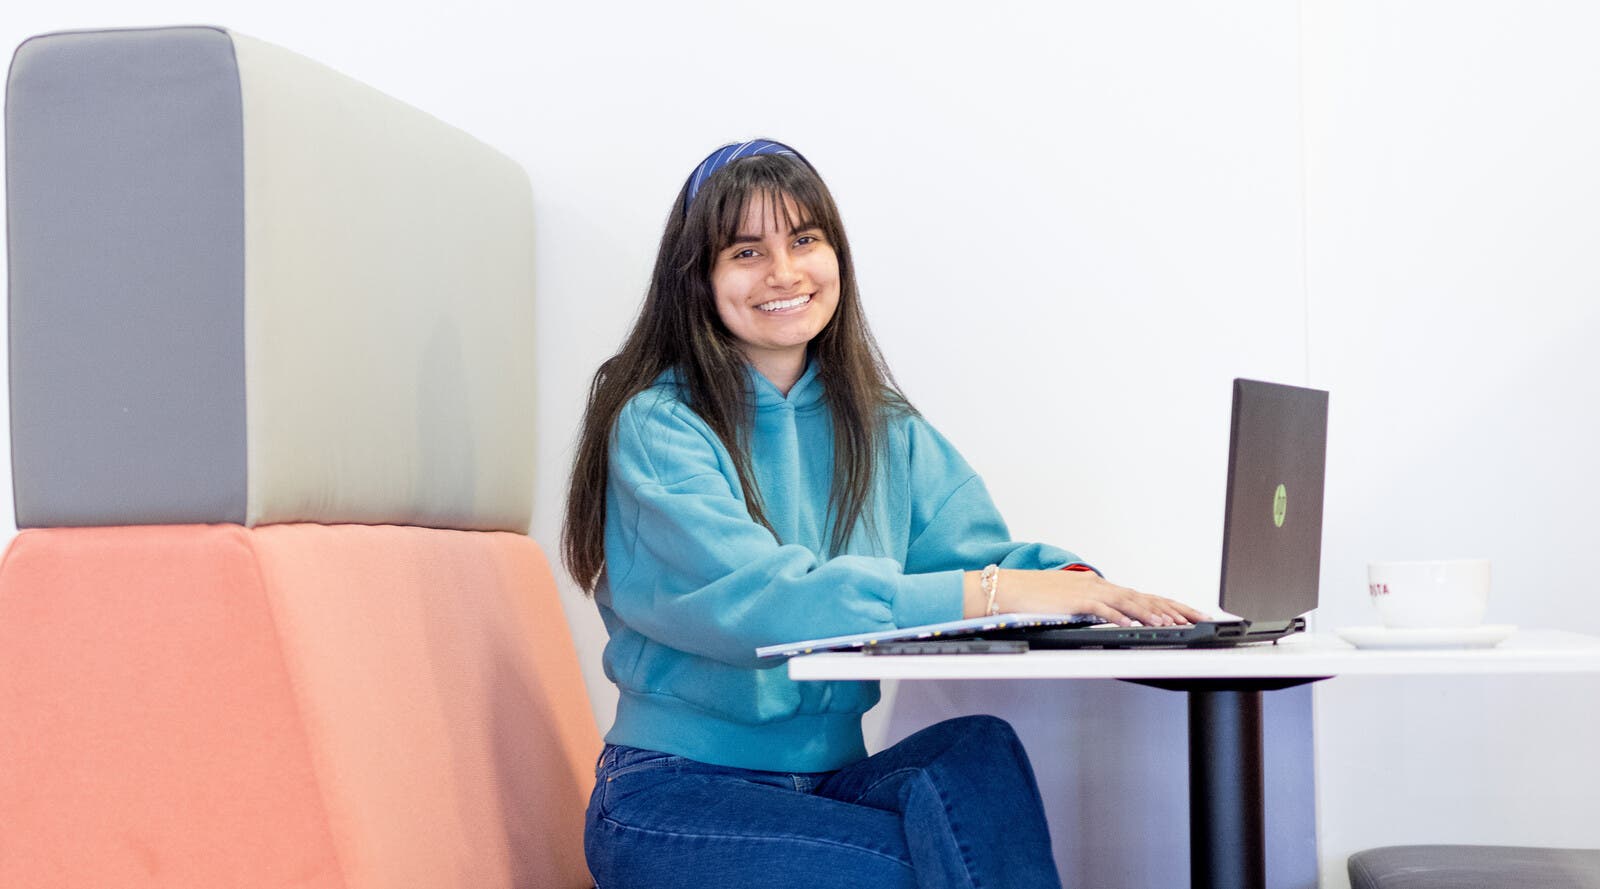 Student smiling and working on laptop